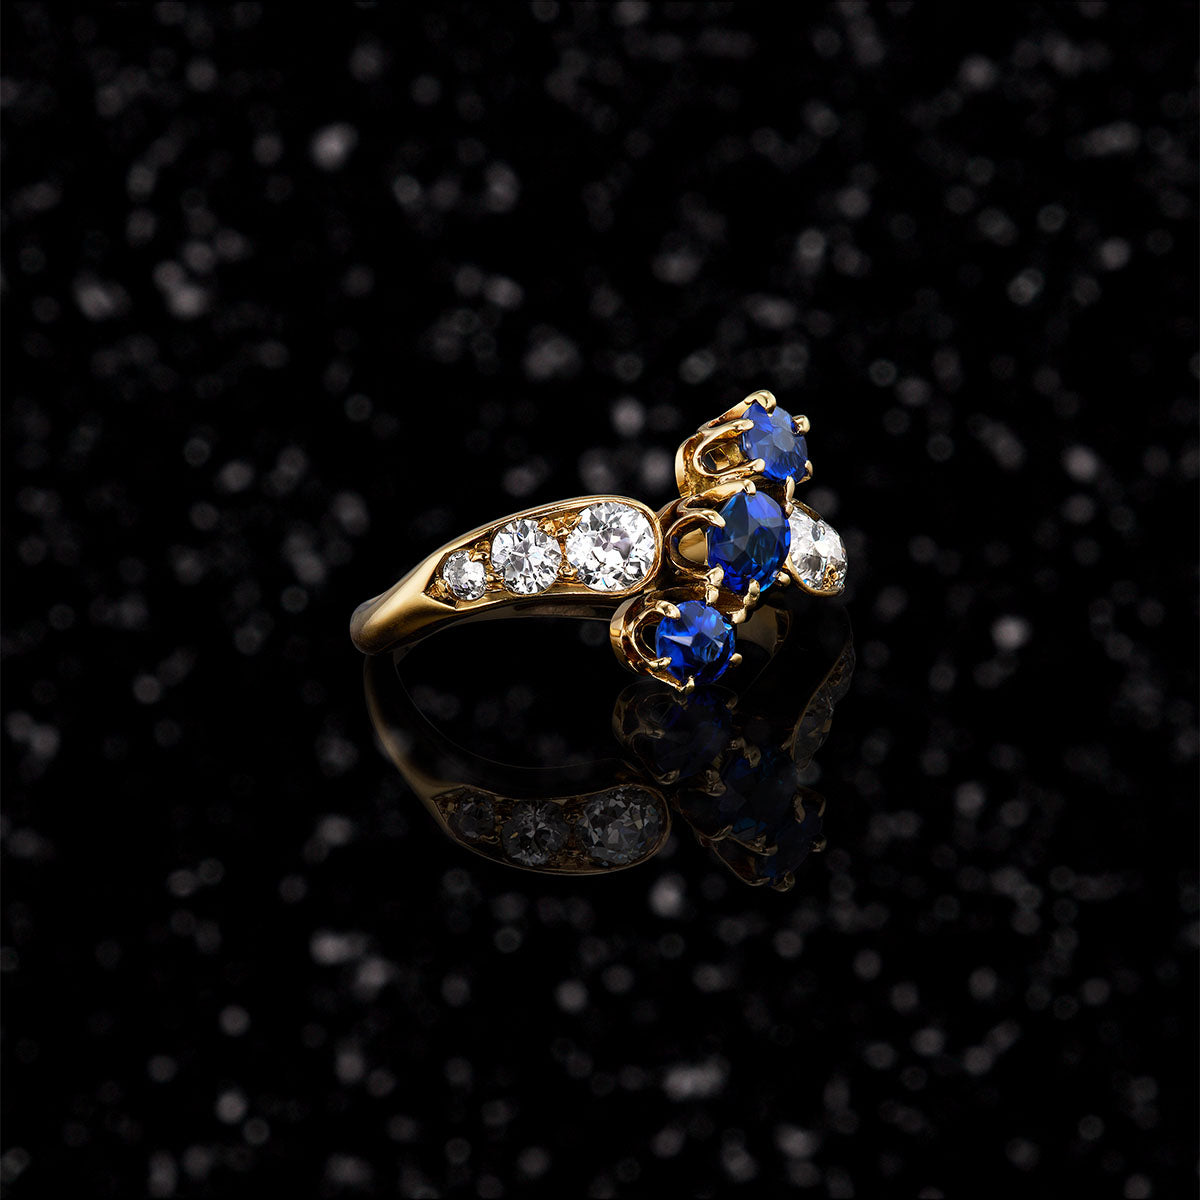 THE ORION RING